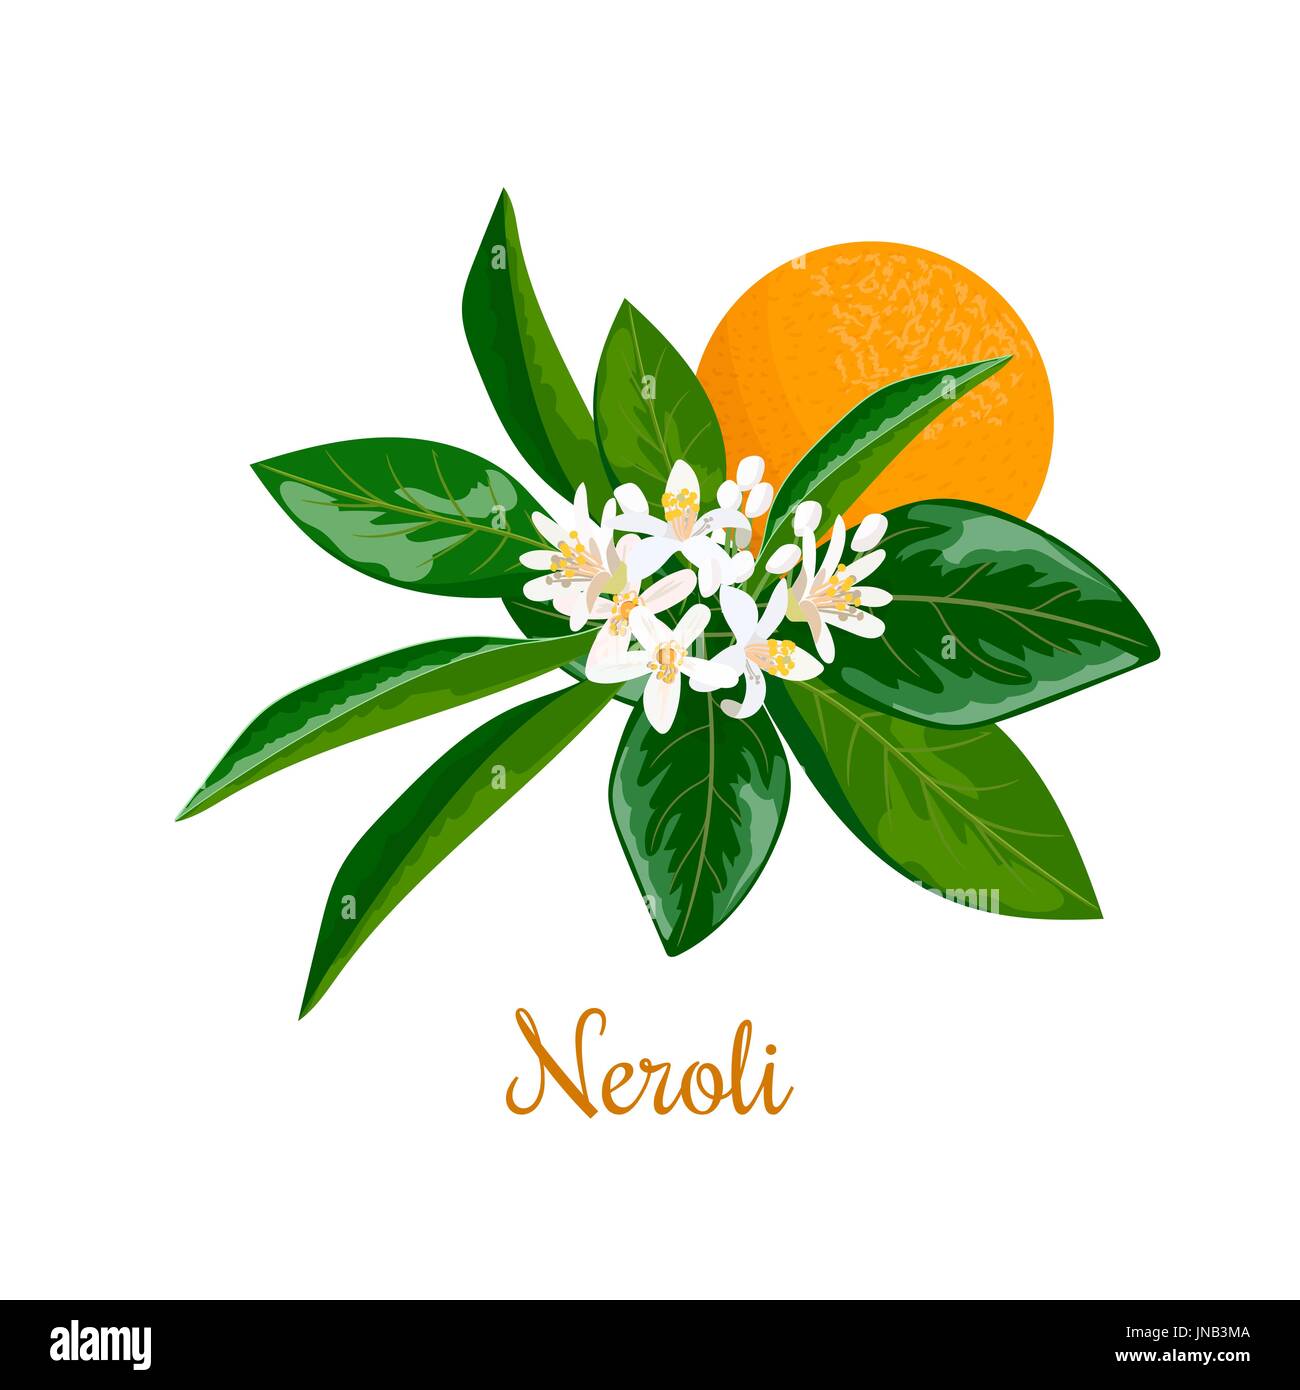 Neroli, twig, flowers and bitter orange. Nature. Vector. Design for essential oil, natural cosmetics, health care products, aromatherapy, homeopathy.  Stock Vector